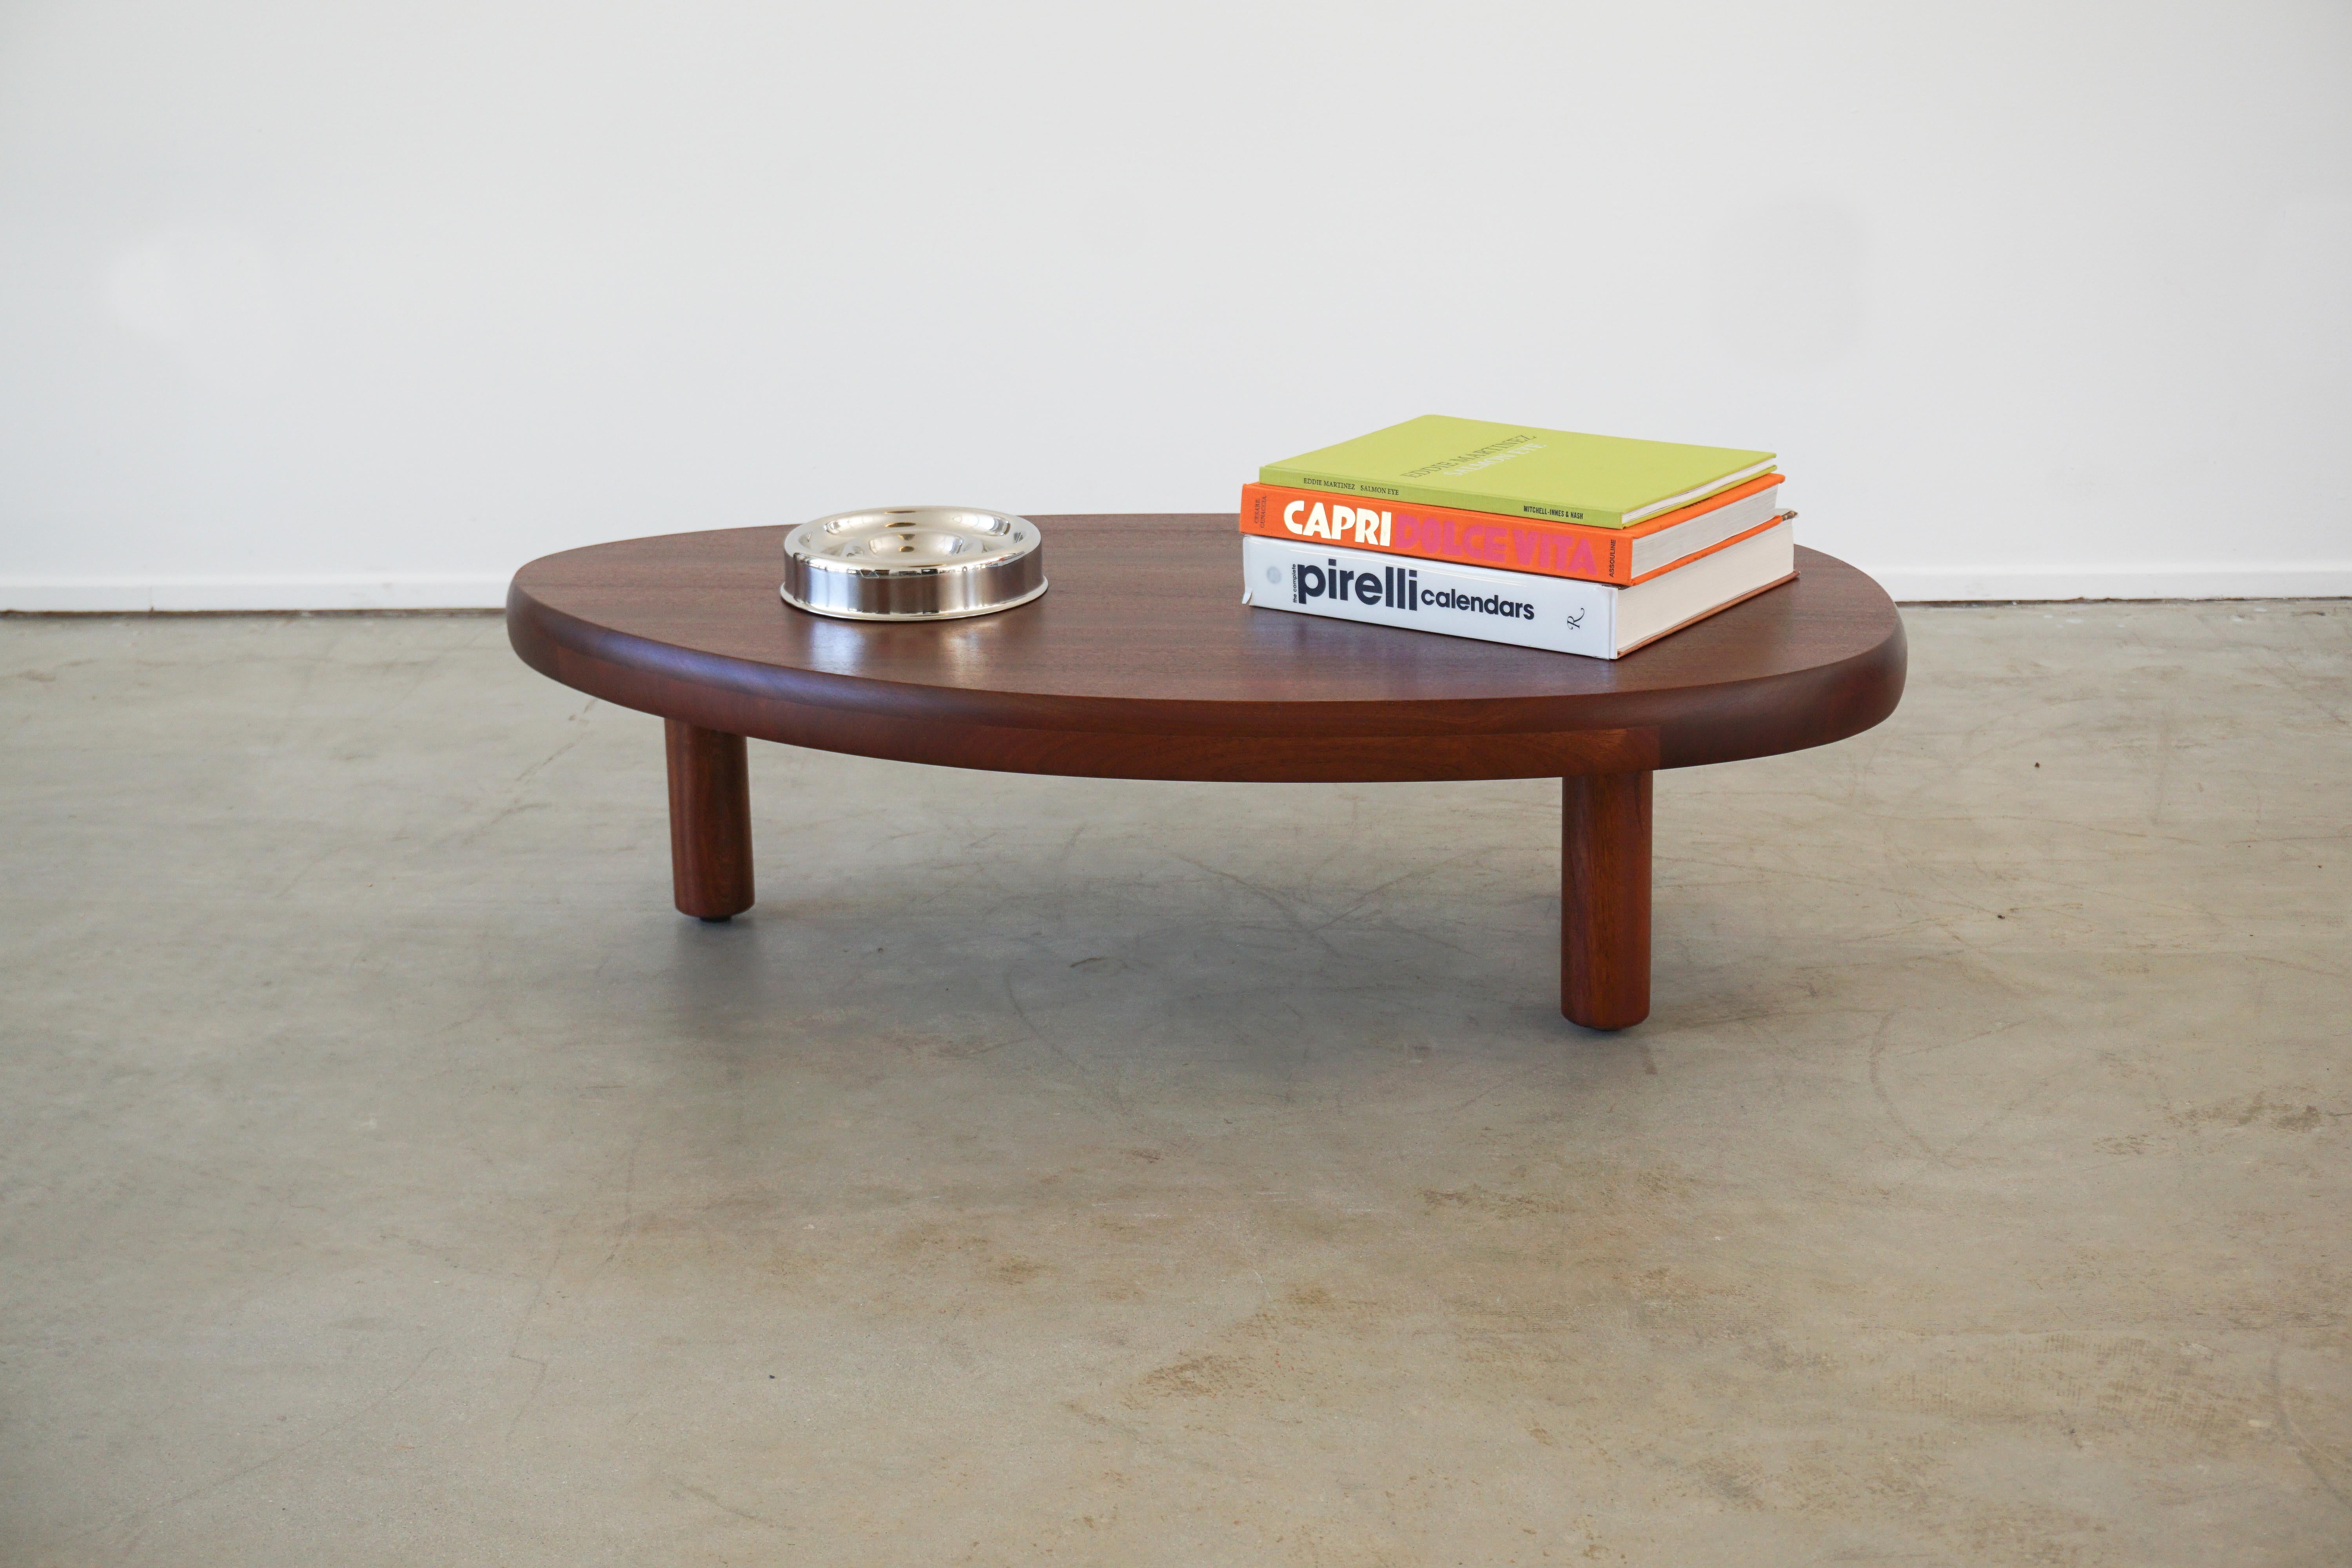 Gorgeous coffee table in the style of 1950's French design with 3 legs and freeform organic shape.
Newly produced by orange in mahogany wood
Incredible gain and wood joinery.
  